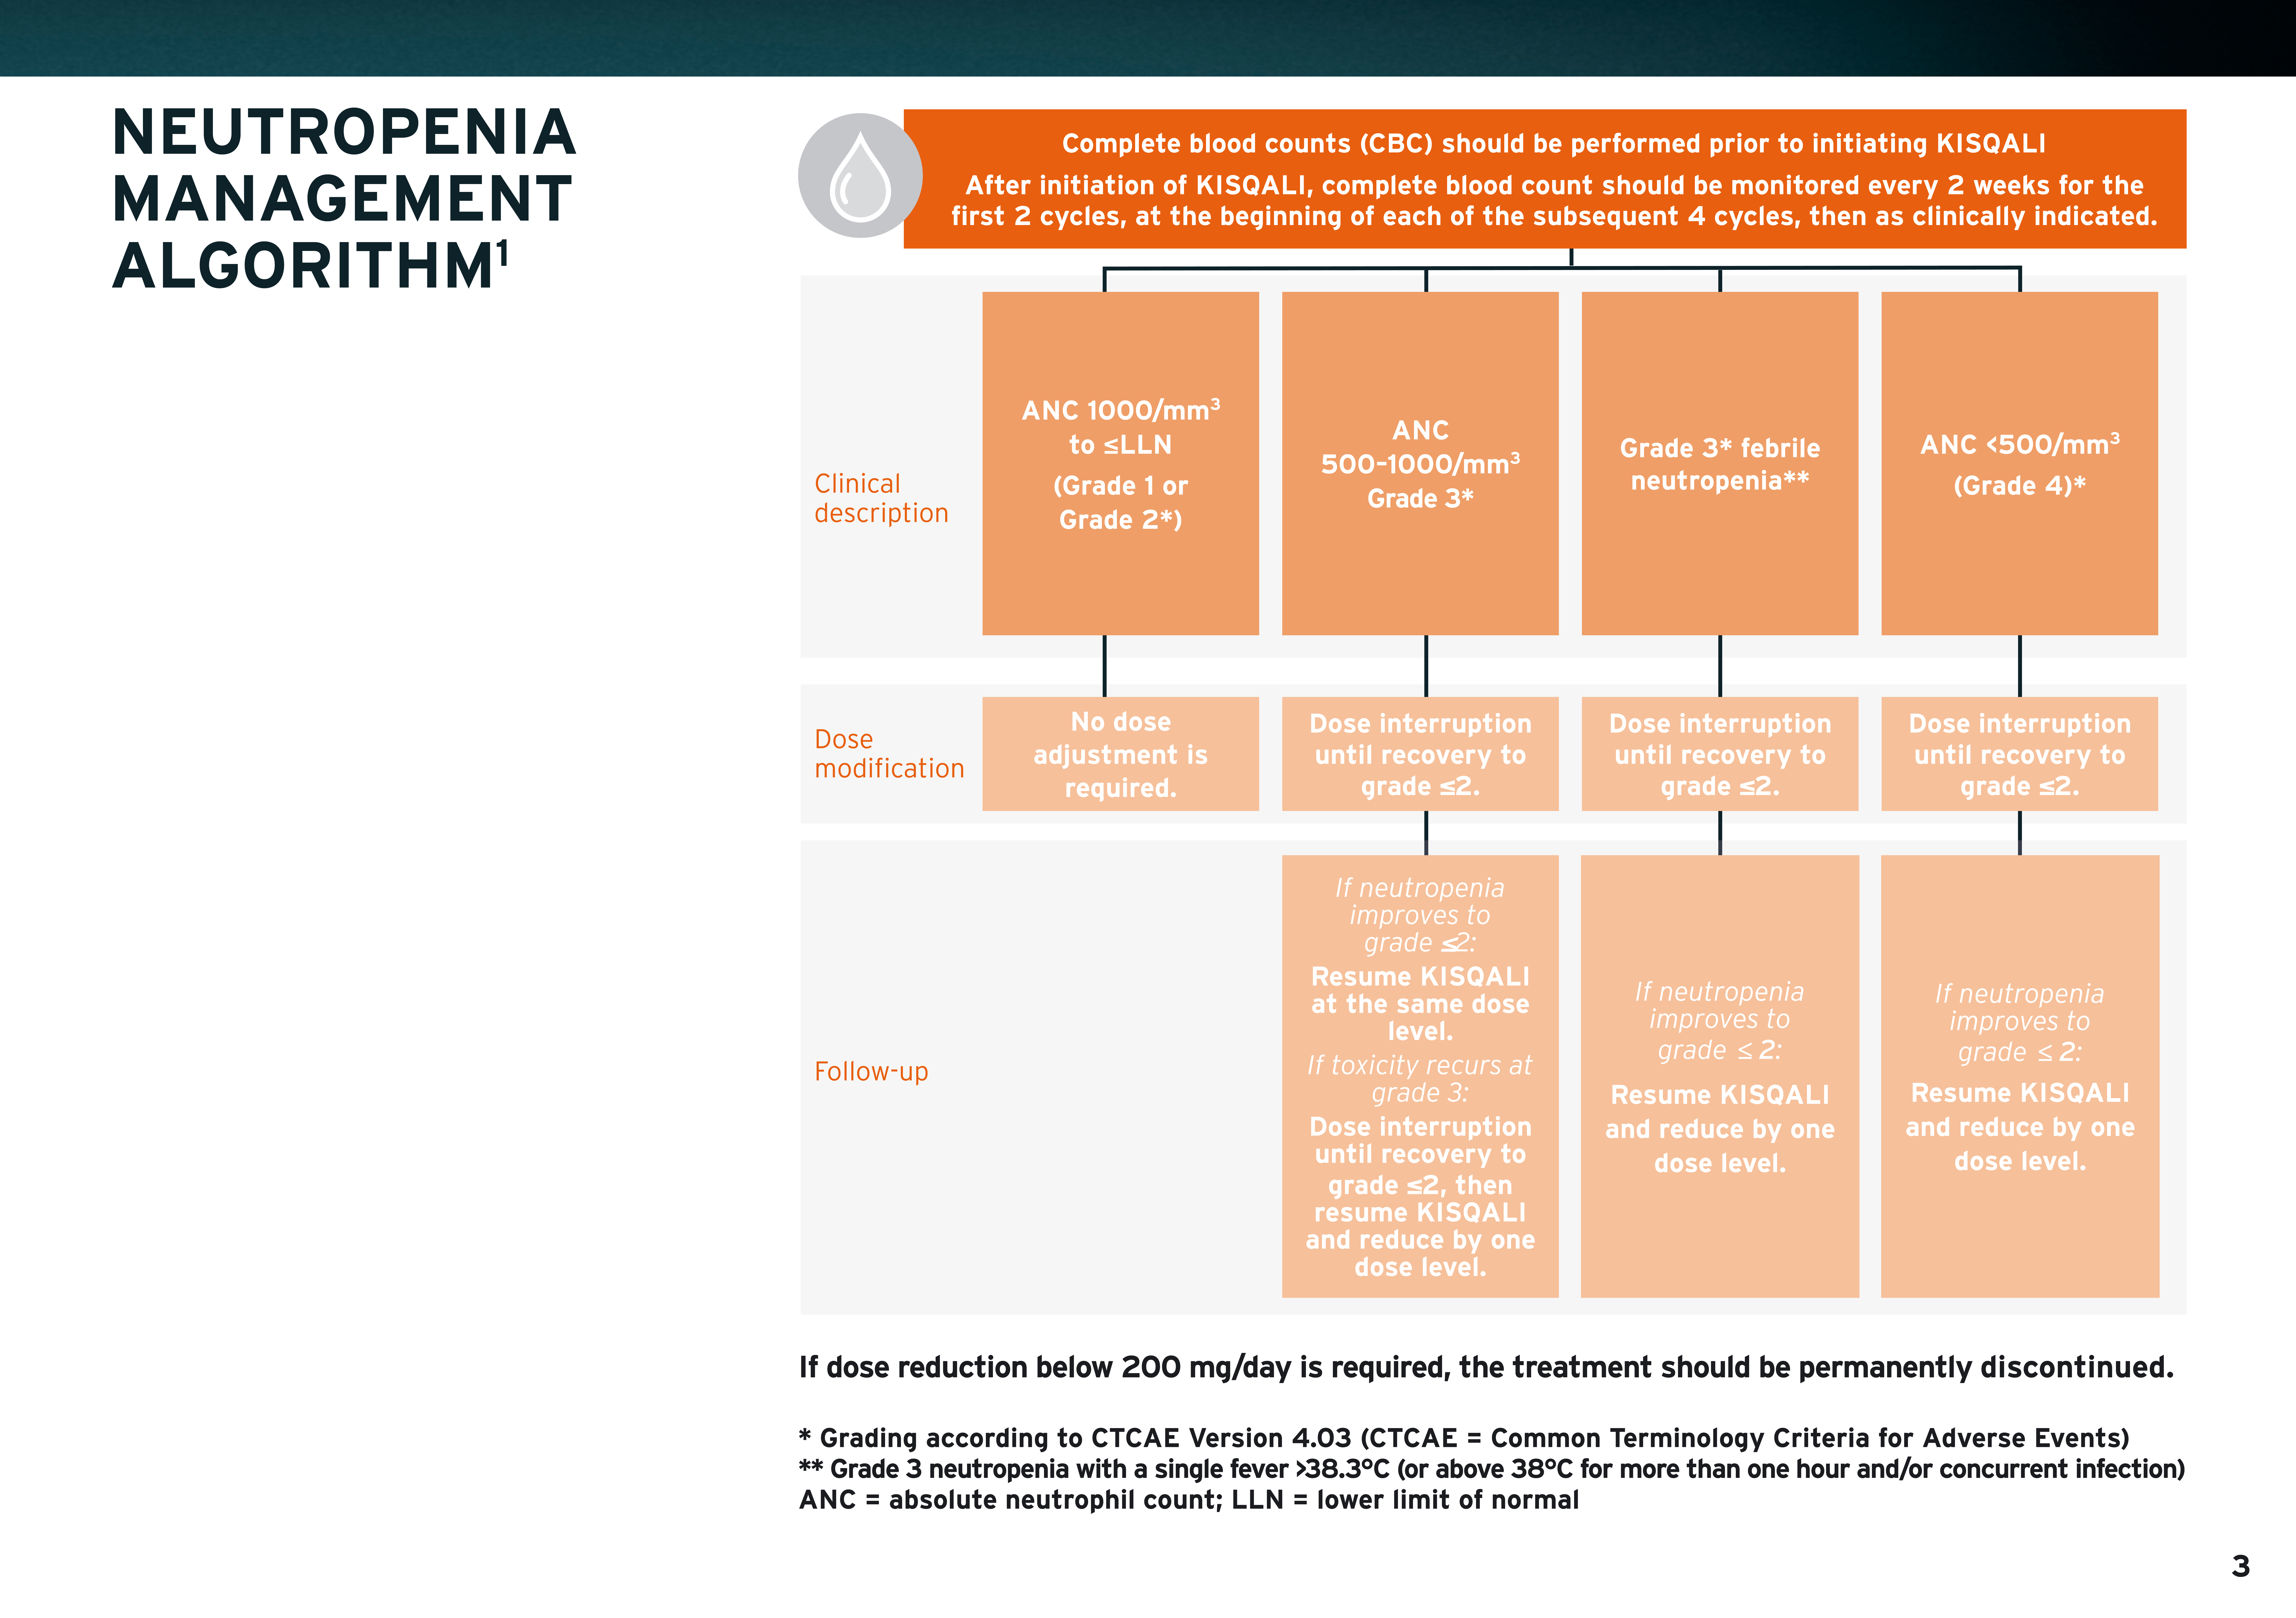 Algorithm showing the recommended dose adjustment process for neutropenia